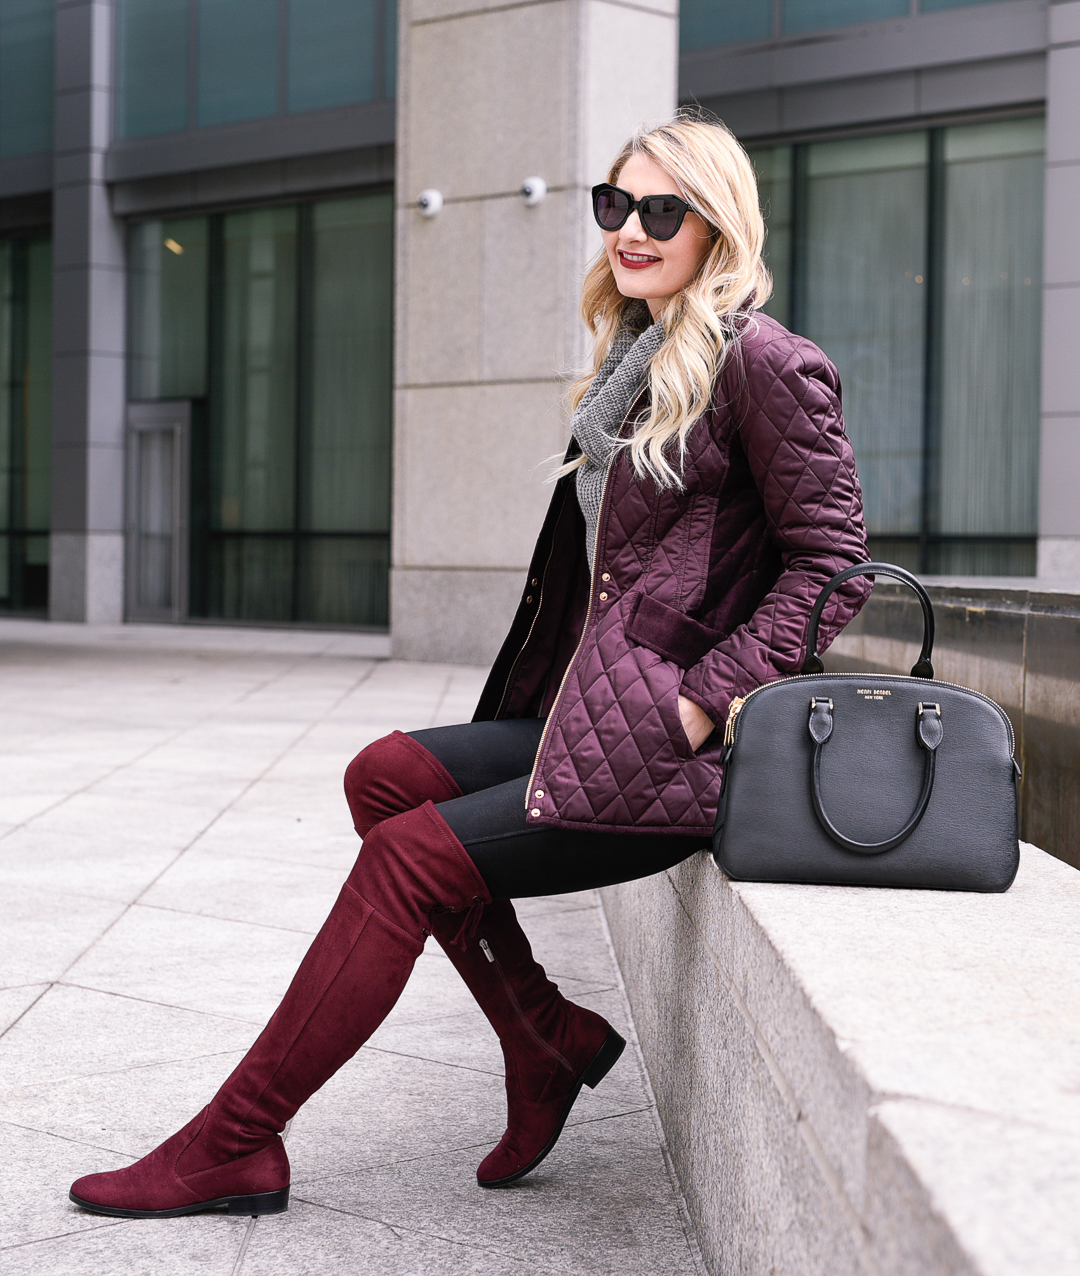 A cozy winter outfit with burgundy accents in suede and velvet.